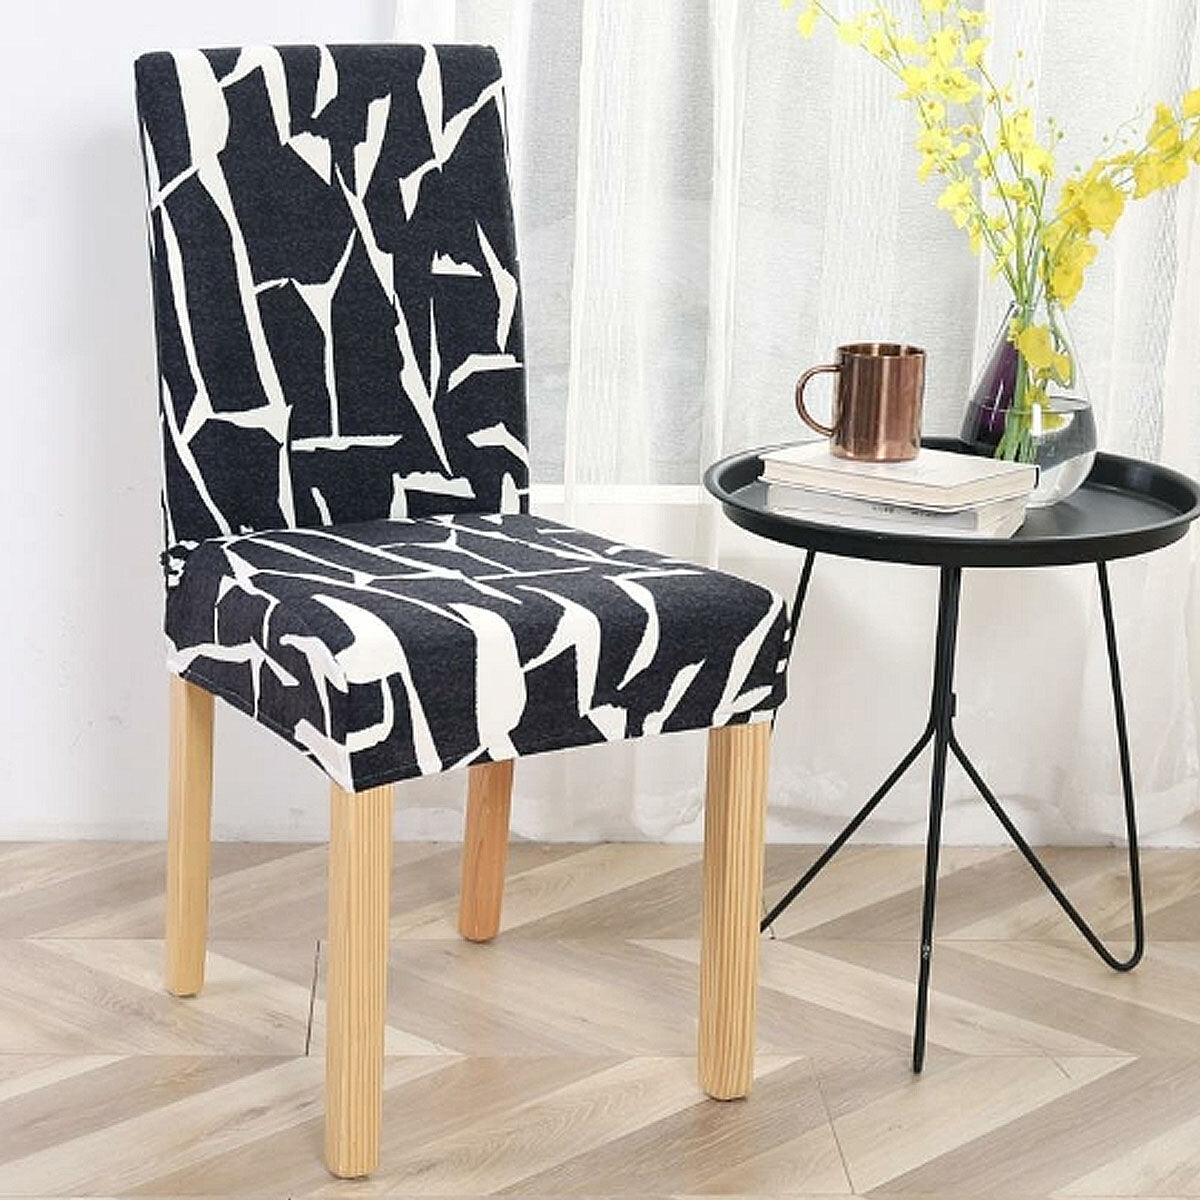 Chair Slipcover Universal Chair Cover for Dining Room / Living Room / Banquet / Party